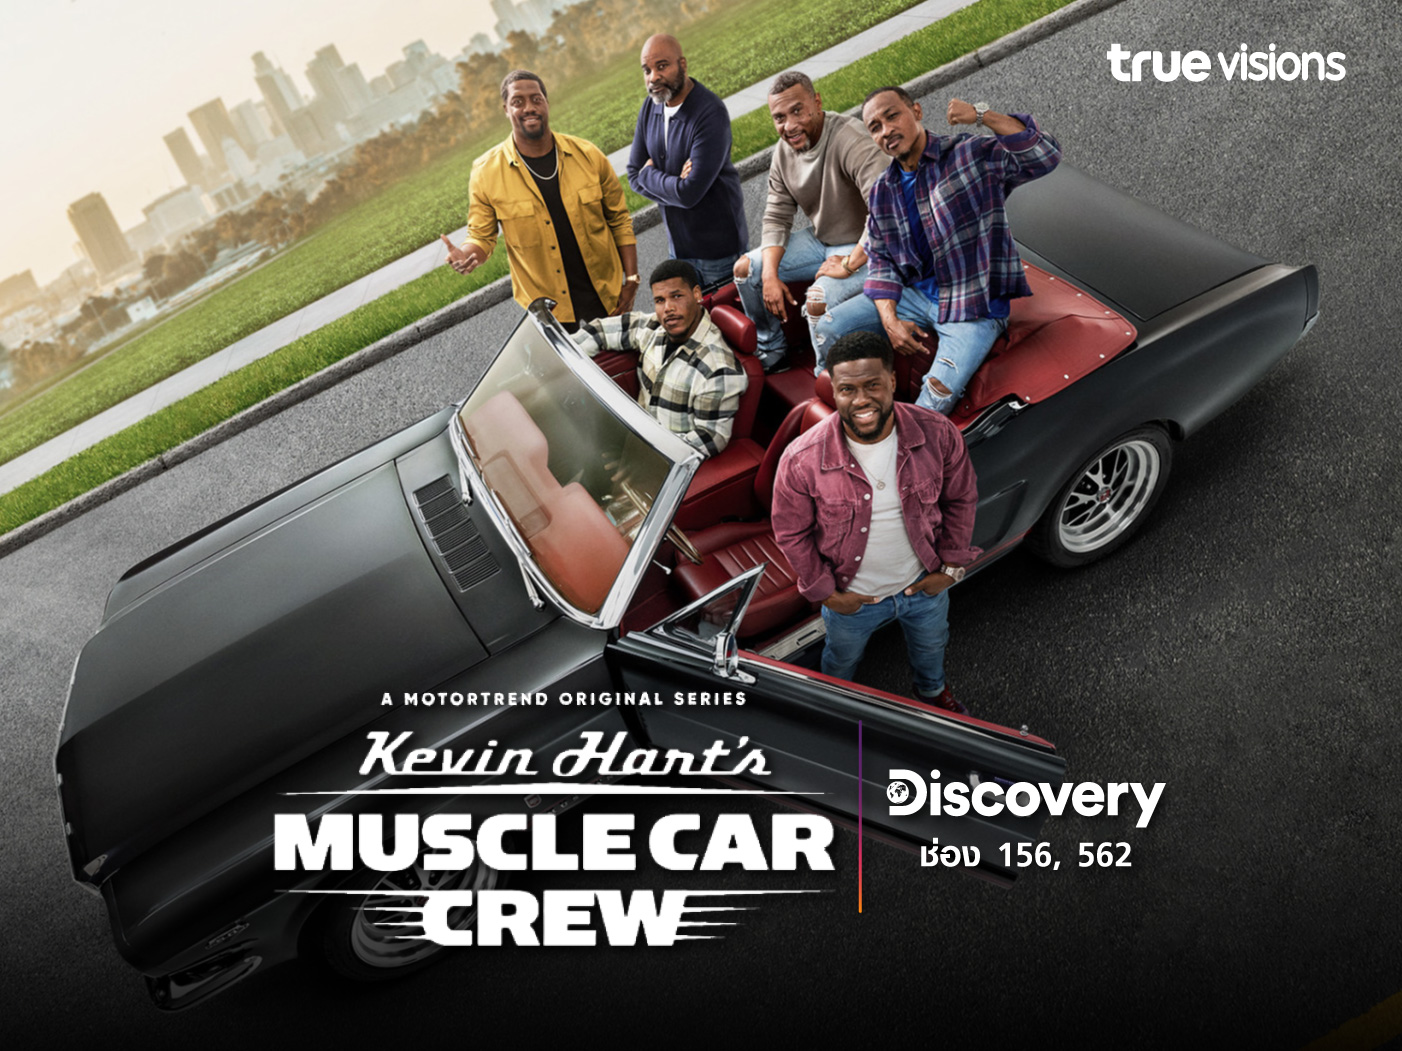 Kevin Hart’s Muscle Car Crew